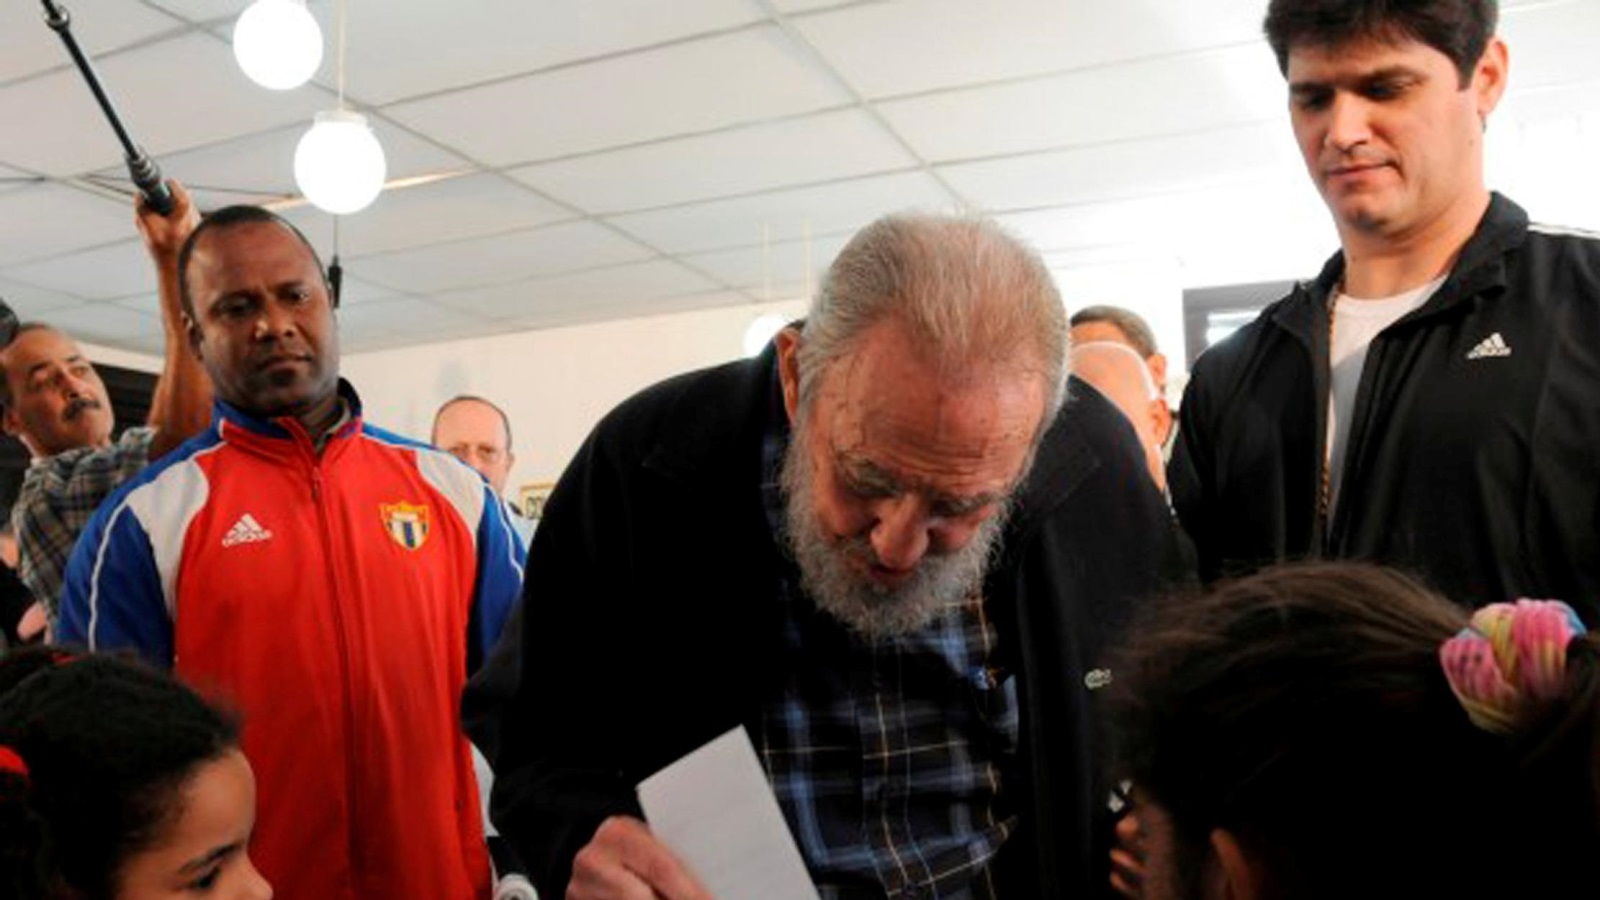 Former Cuban leader Fidel Castro (C) casts his ballot at a polling station in Havana in this February 3, 2013 file photo provided by Cubadebate. REUTERS/Ismael Francisco/Cubadebate/Handout/File Photo       ATTENTION EDITORS - THIS IMAGE WAS PROVIDED BY A THIRD PARTY. EDITORIAL USE ONLY.